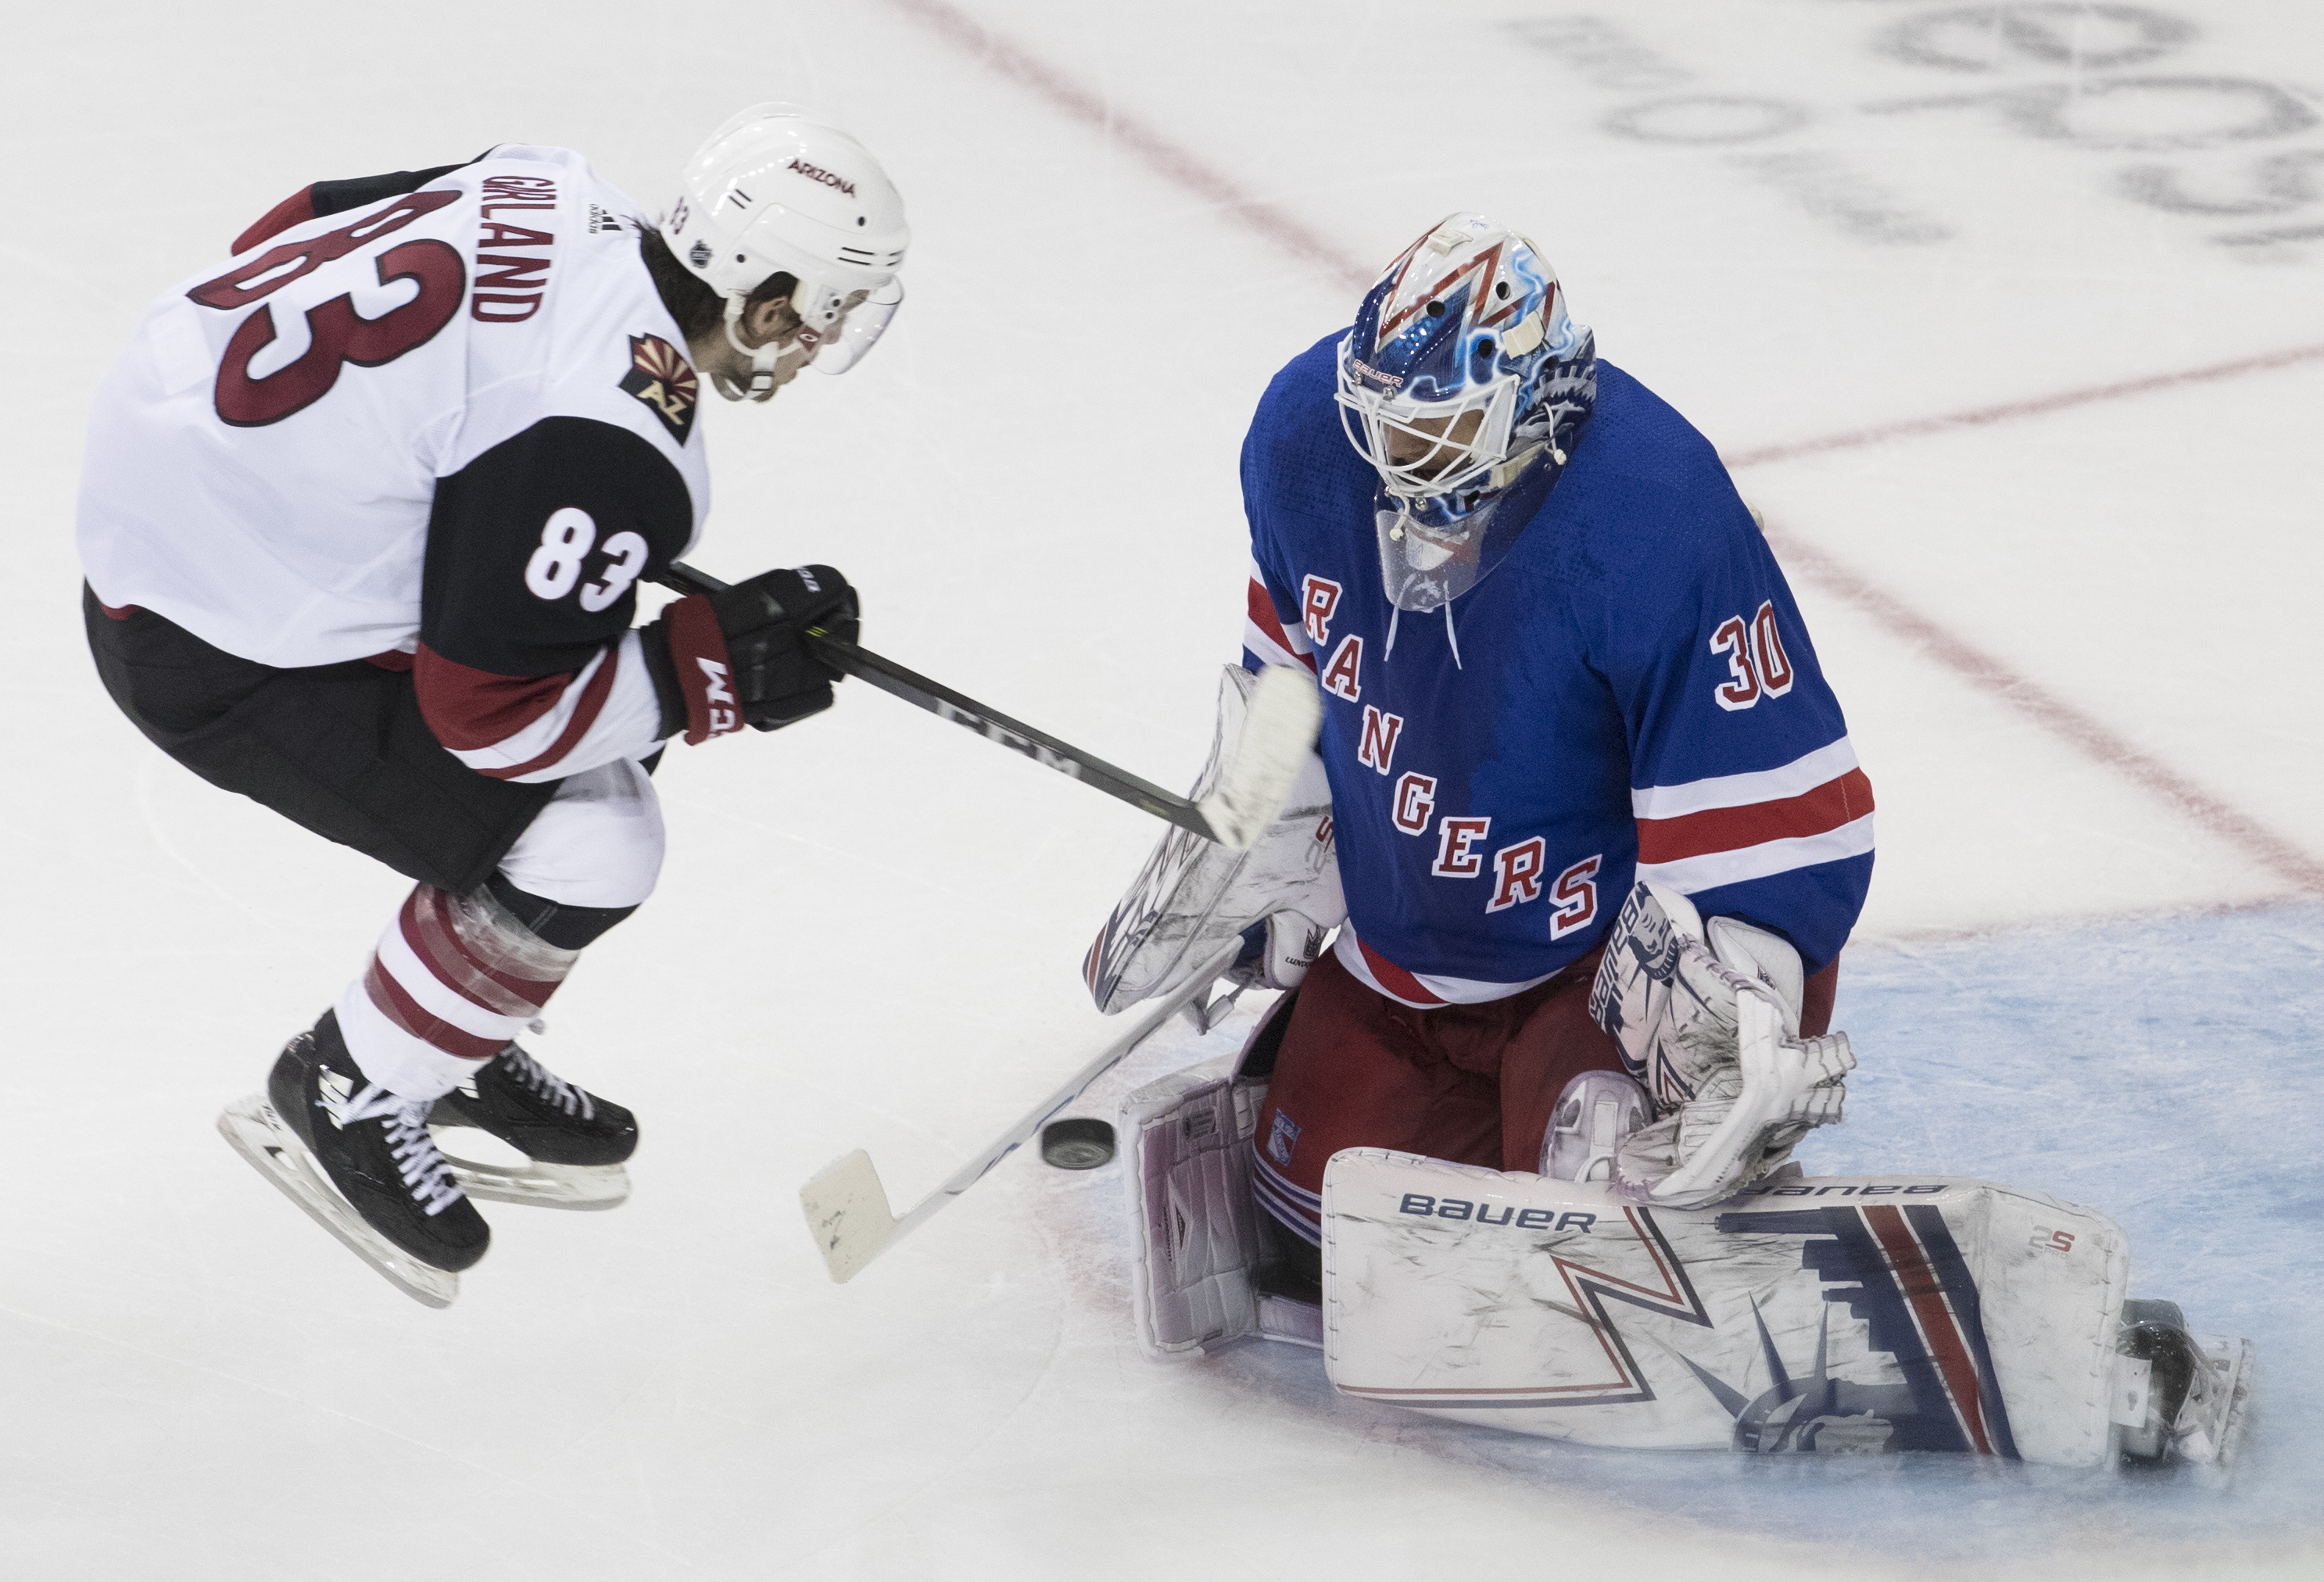 Stepan scores in OT to lift Coyotes to 4-3 win over Rangers